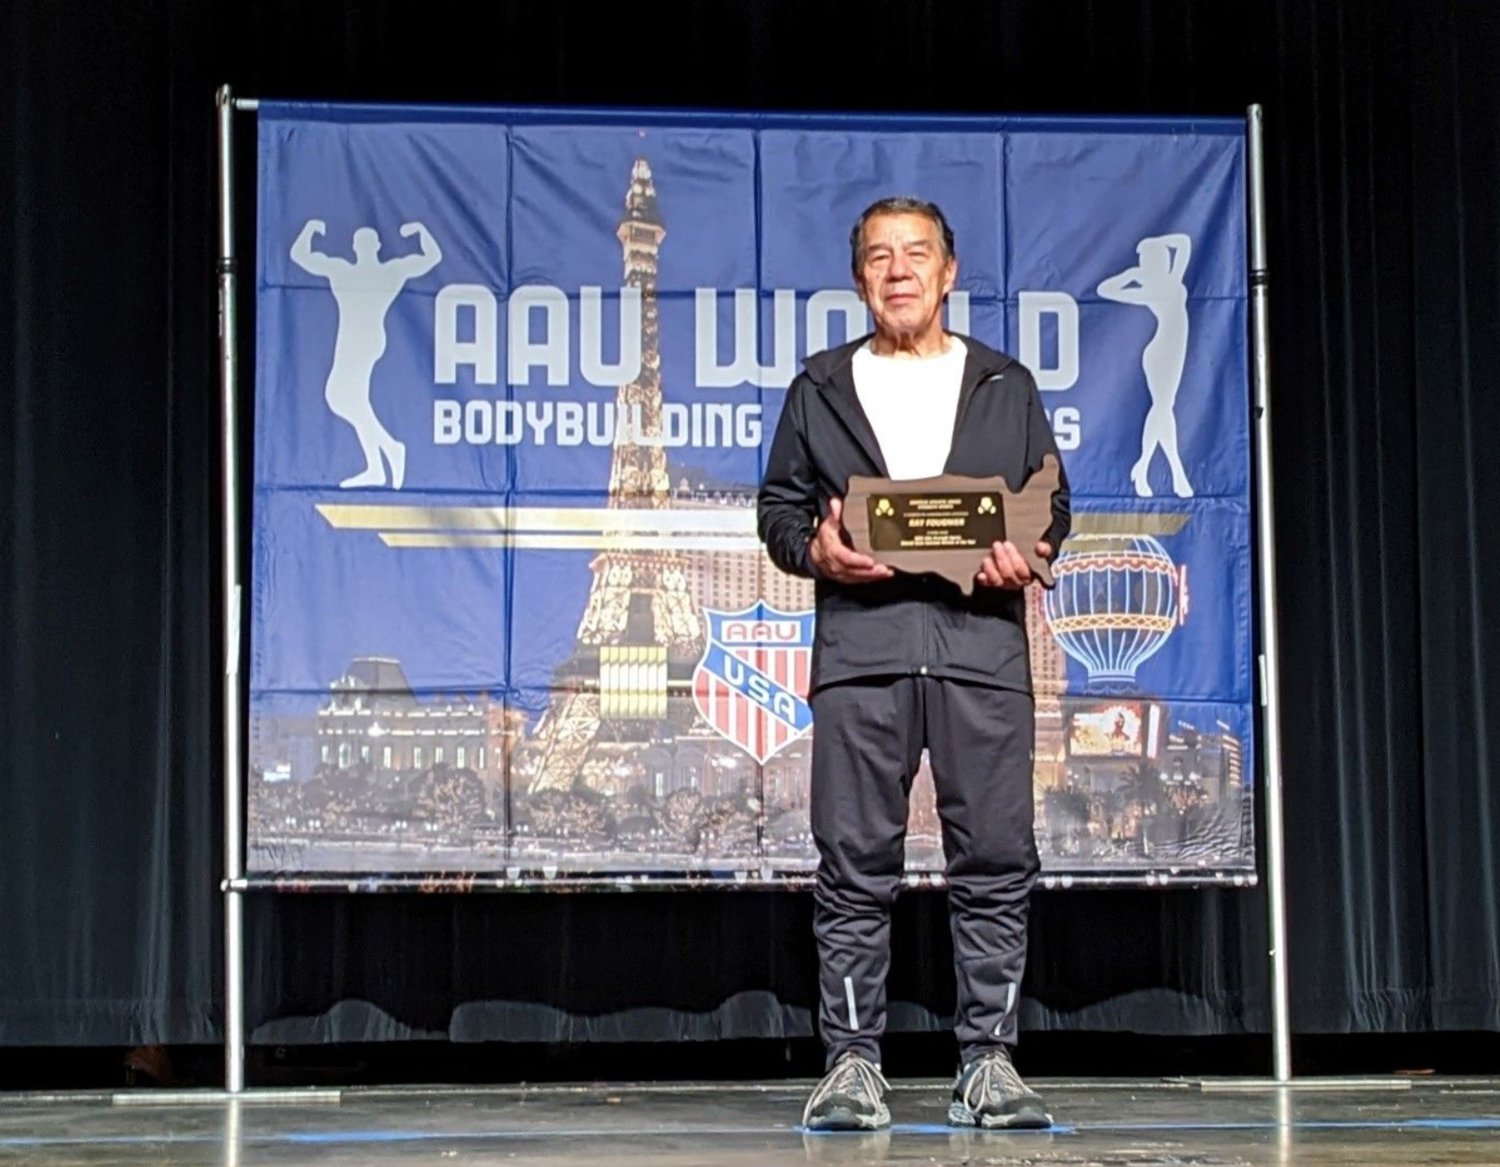 Oneida Indian Nation Member Ray Fougnier receives the 2022 Amateur Athletic Union Strength Sports Overall Male National Athlete of the Year Award following the AAU Powerlifting World Championships held in Las Vegas, Nevada earlier this month. The 79-year-old Fougnier set 27 new world records and earned eight gold medals at the competition.